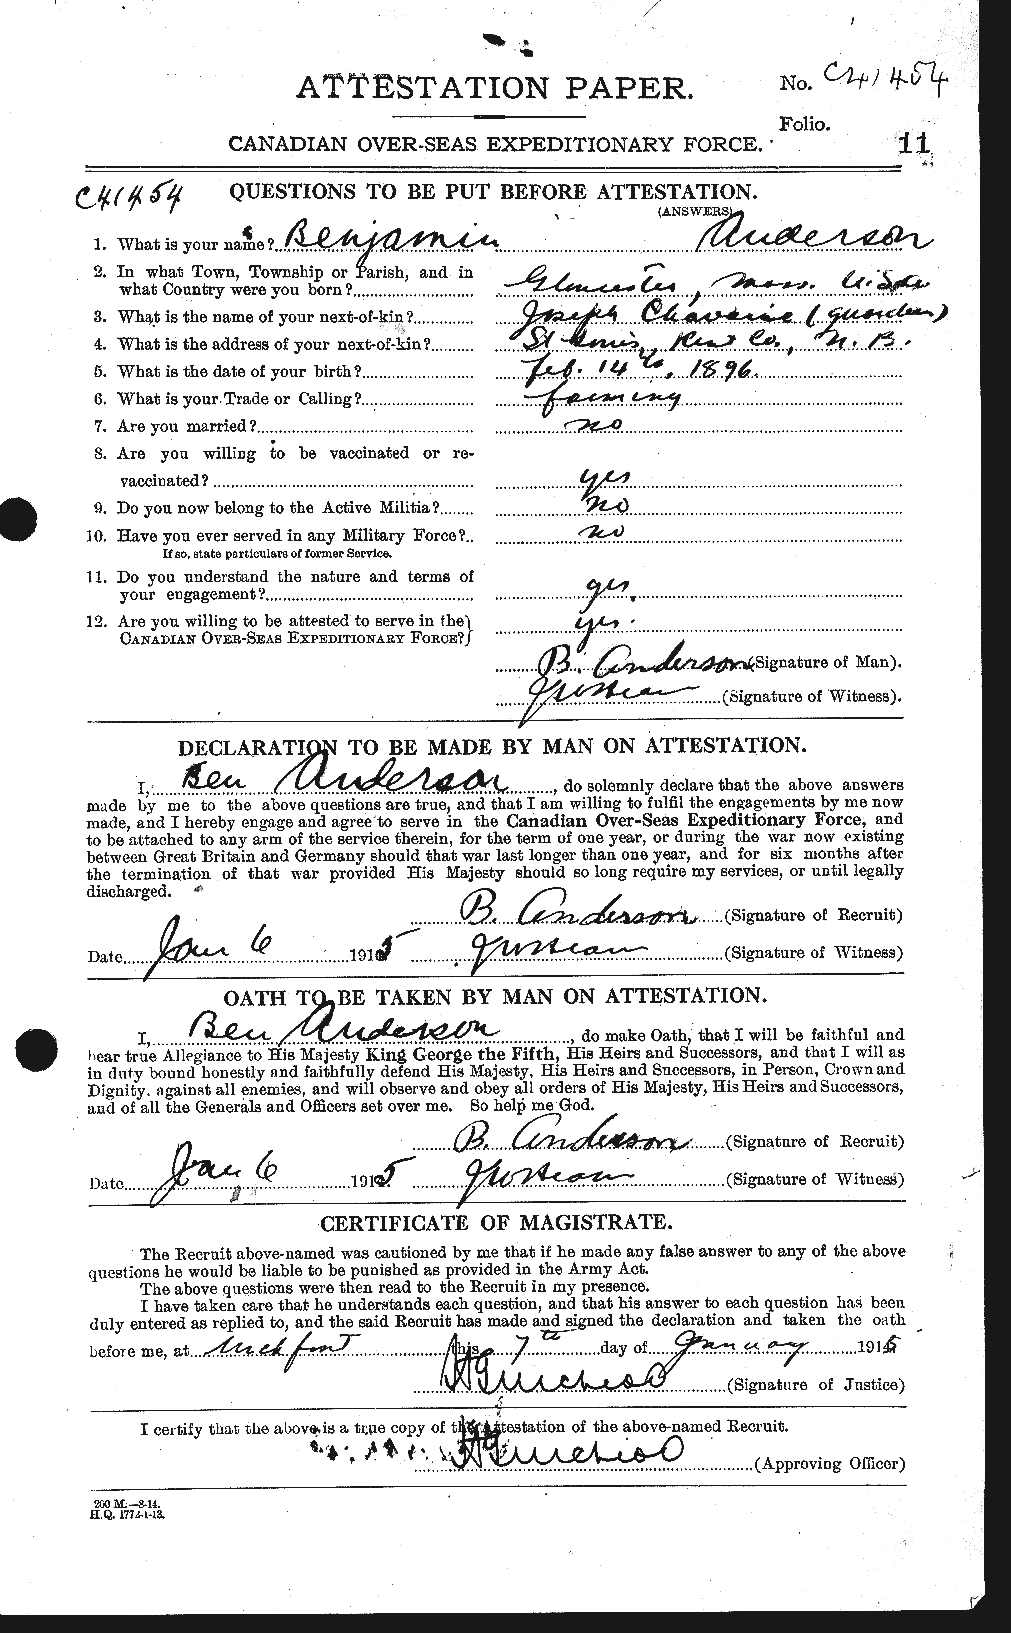 Personnel Records of the First World War - CEF 209321a